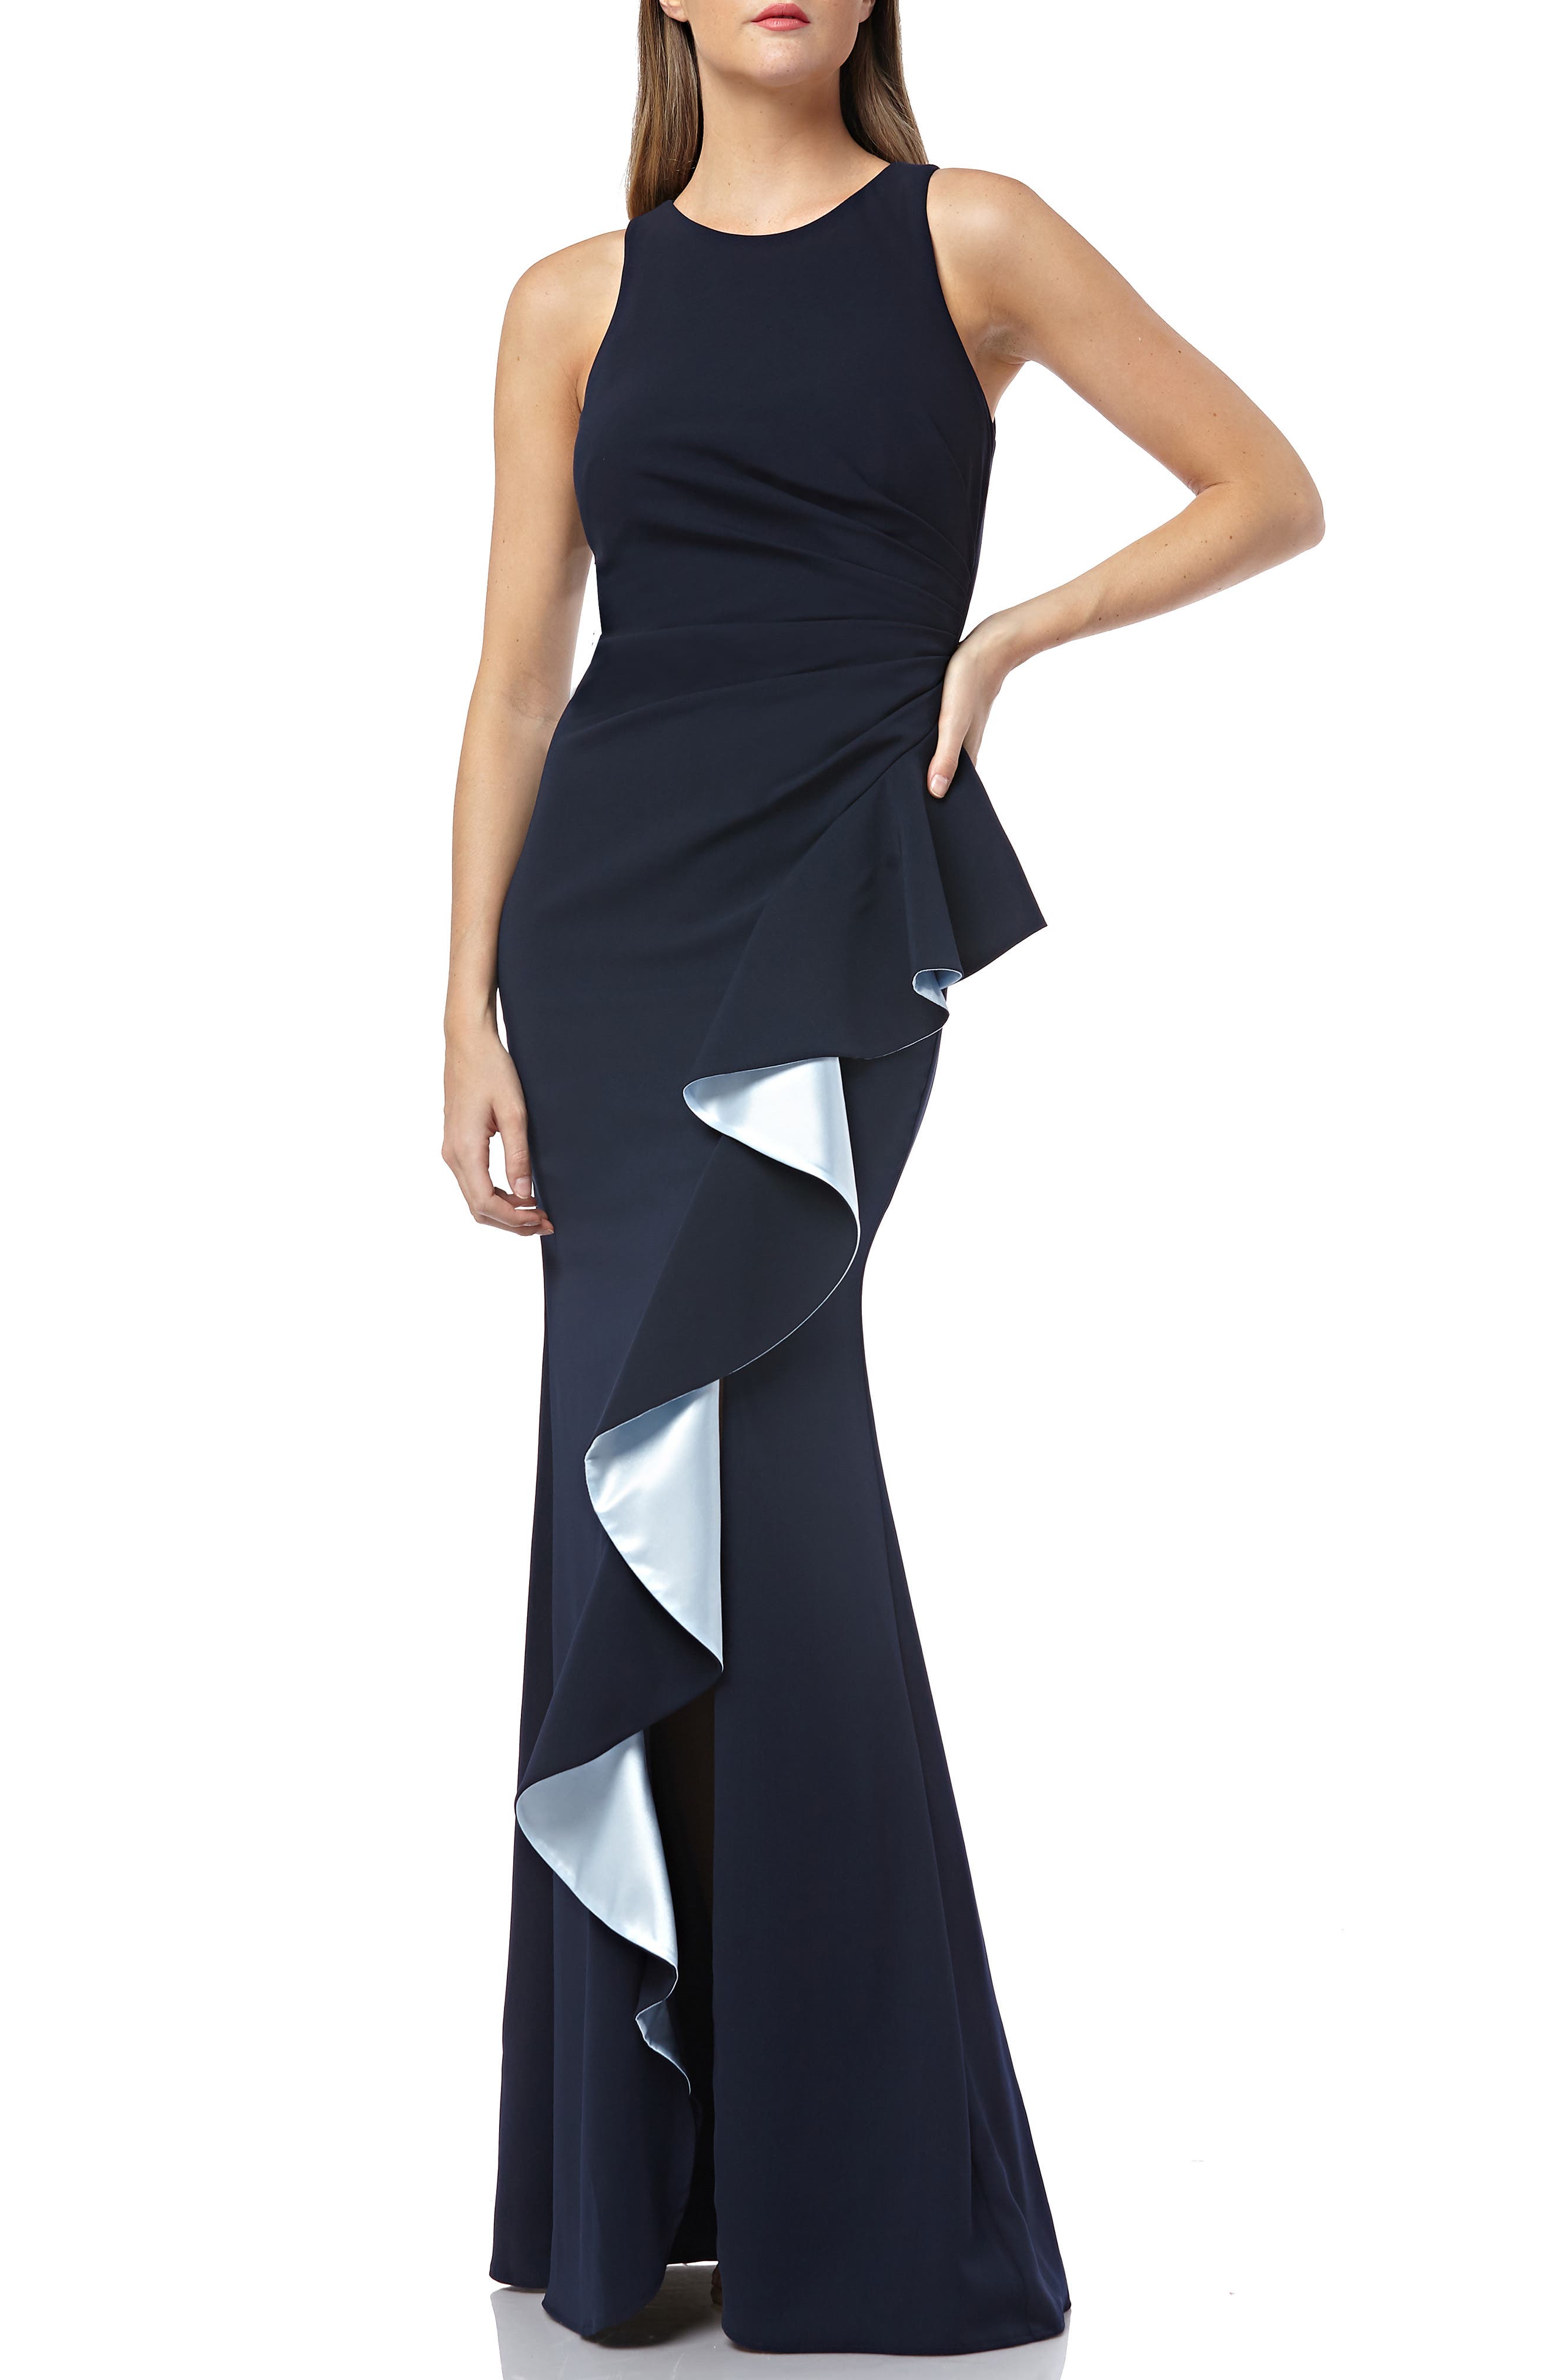 carmen marc valvo couture infusion ruffle gown